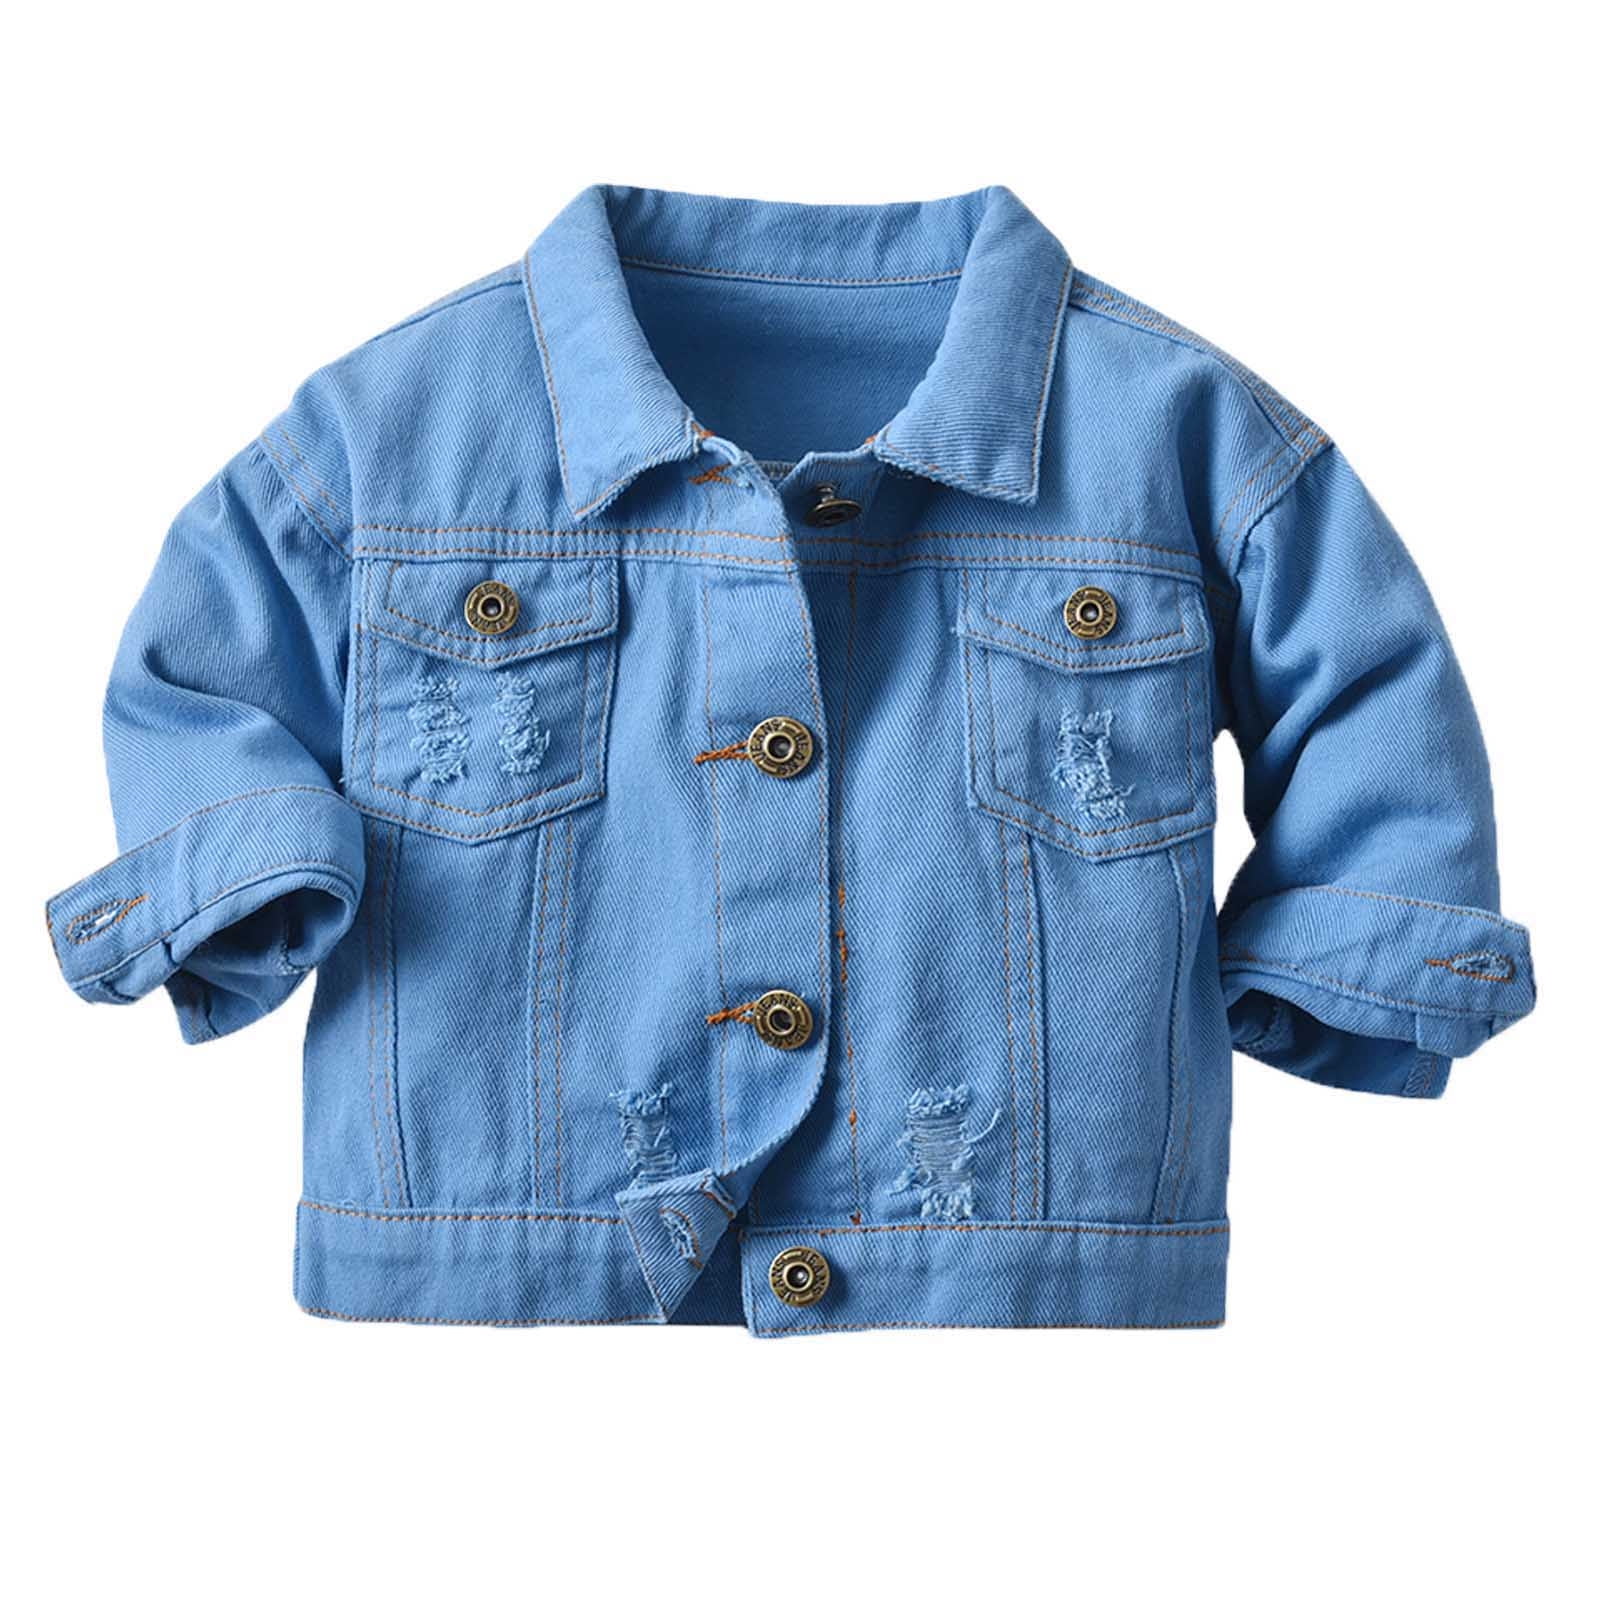 Baby Boy Denim Jacket Children Hooded Jean Coat Girls Blue Ripped Jeans Outwear Spring Autumn Kids Clothes 3-4 Years 